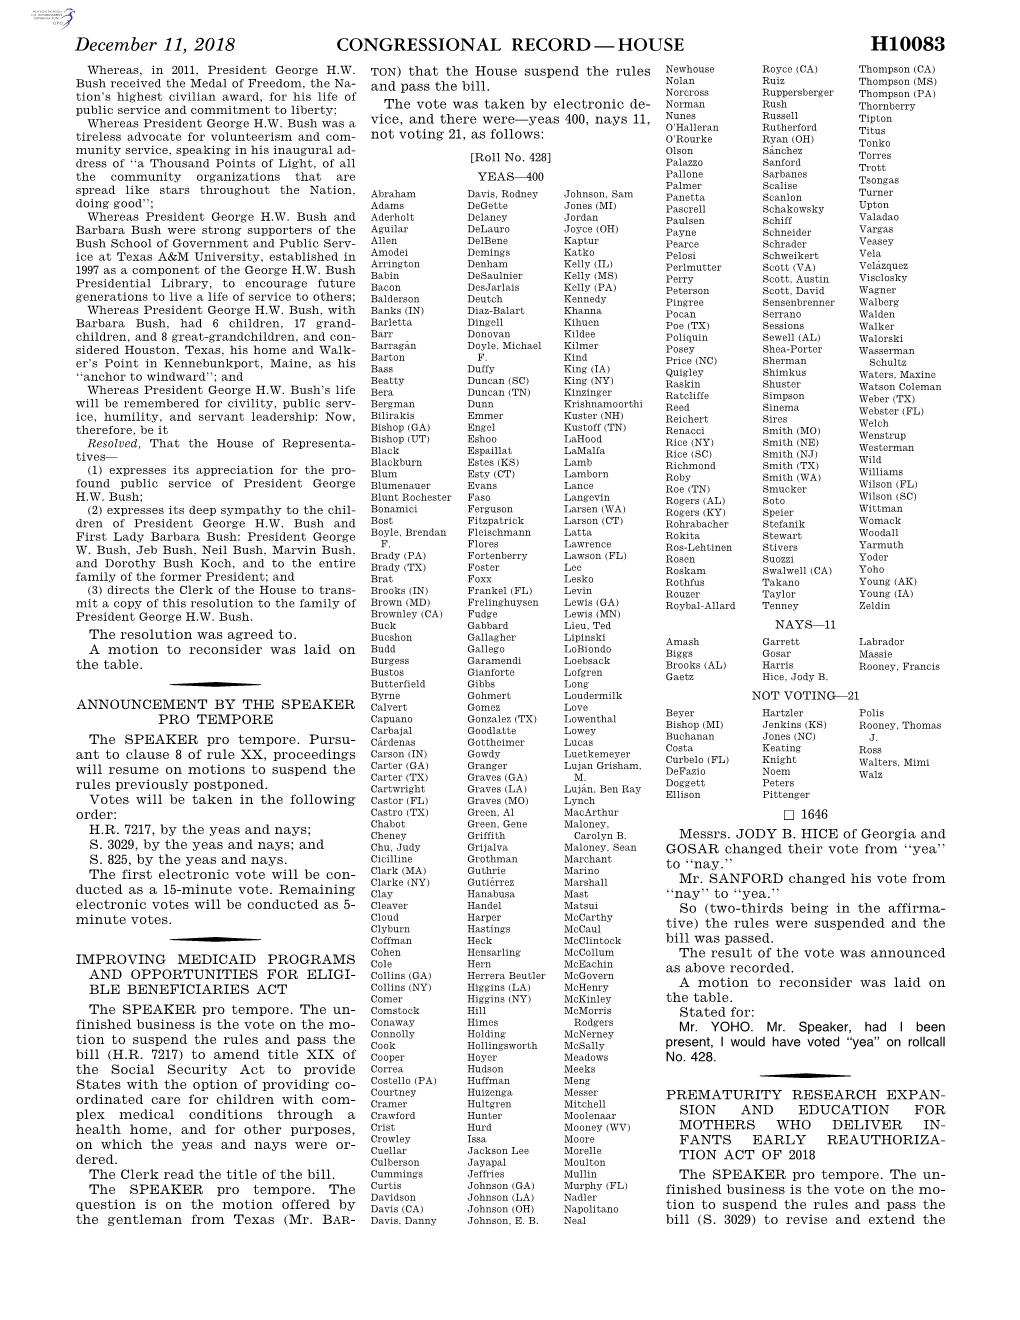 Congressional Record—House H10083